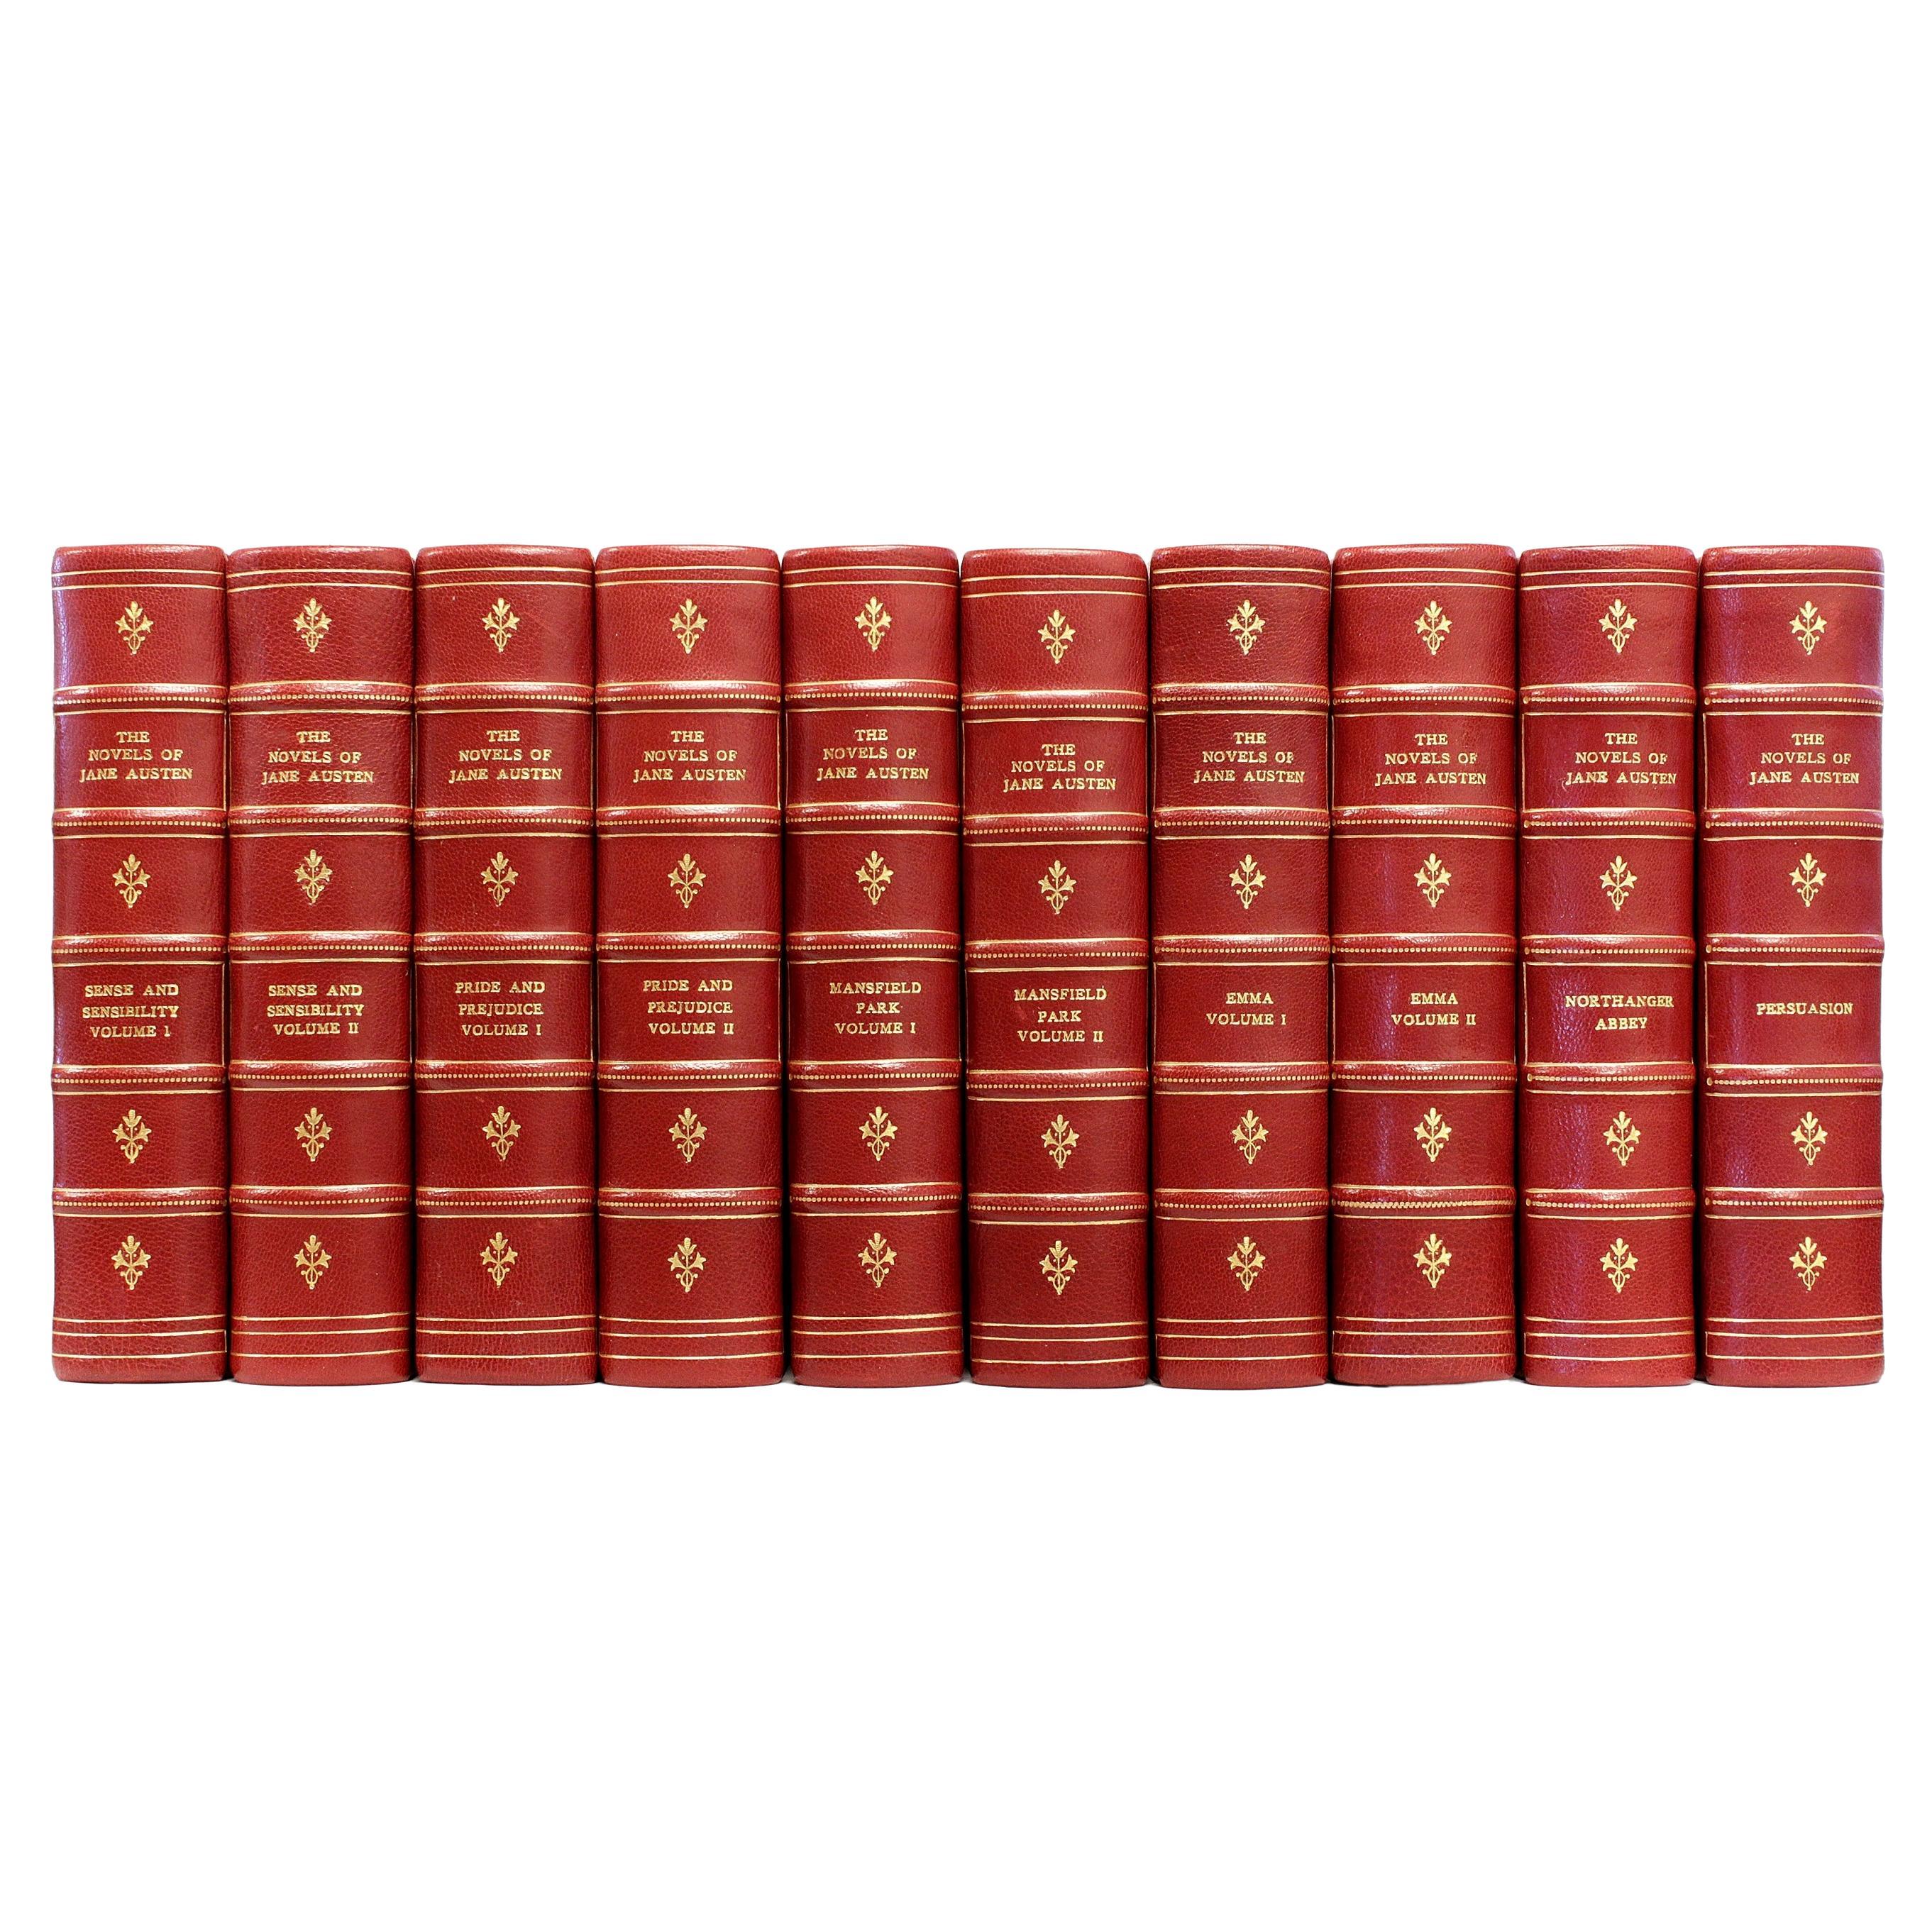 Novels 'Works' of Jane Austen. Winchester Edition, 10 Vols, 1906 Leather Bound For Sale